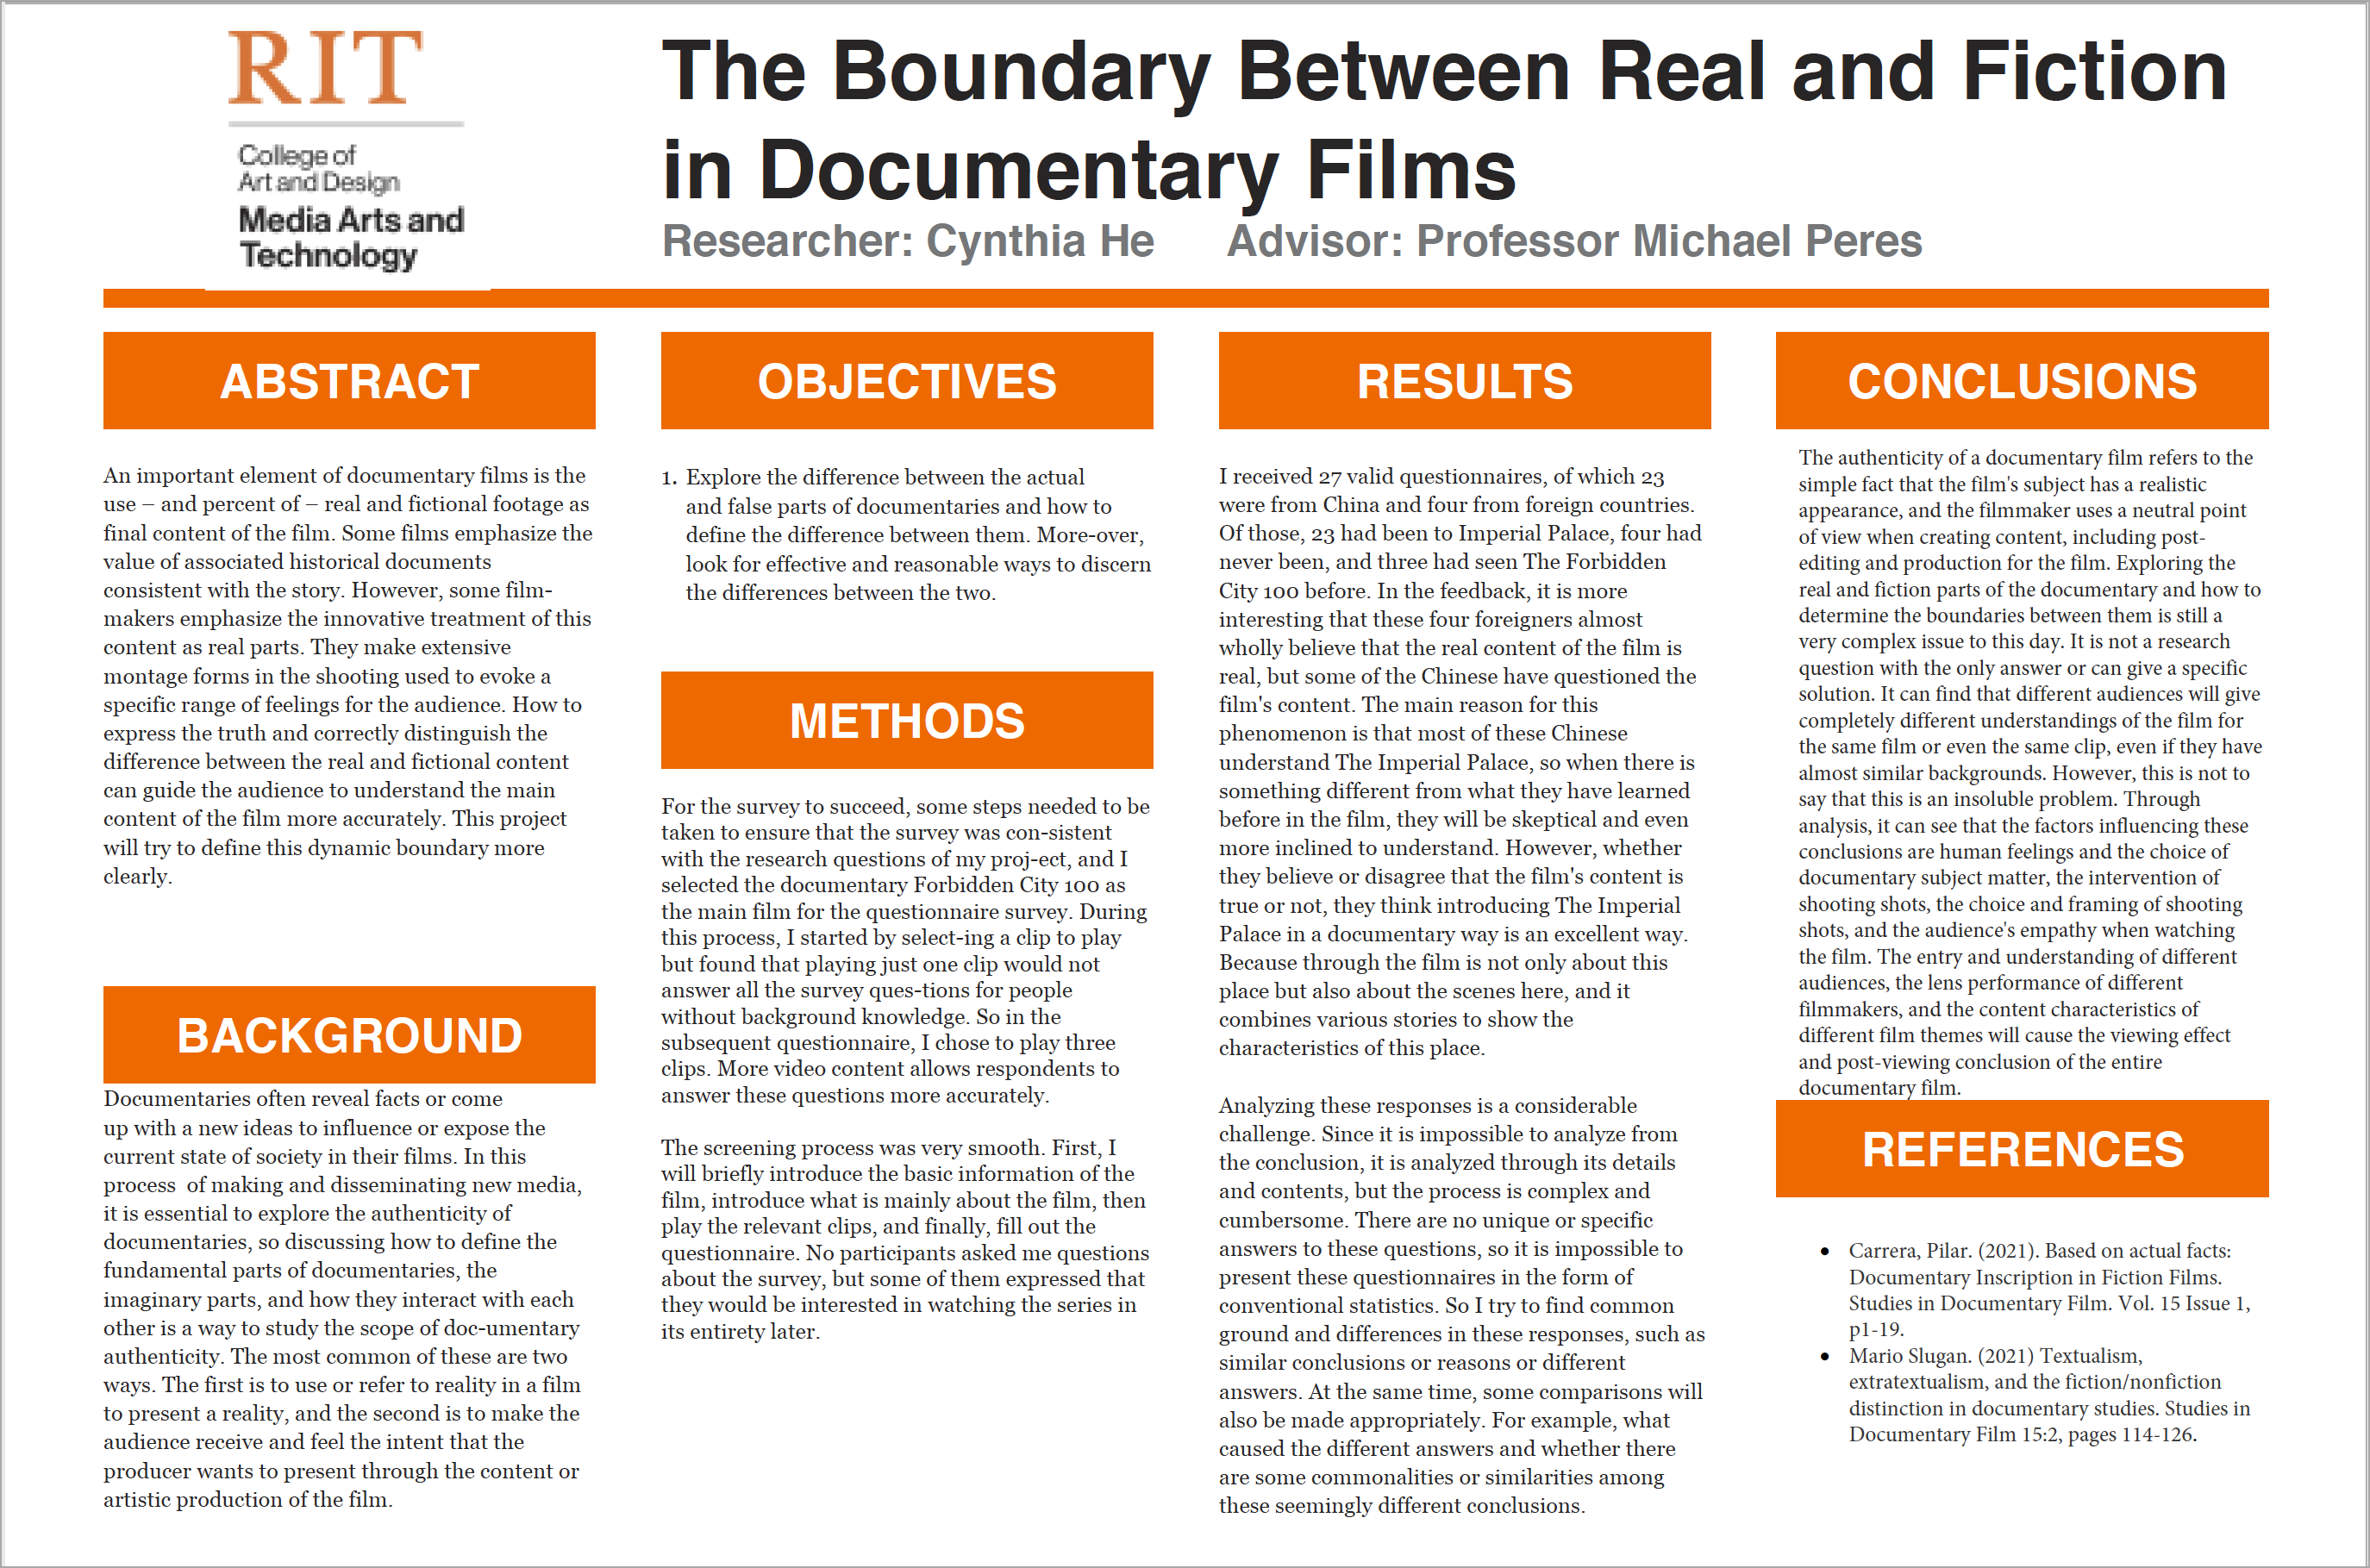 A poster highlighting research on the boundary between real and fiction in documentary films.